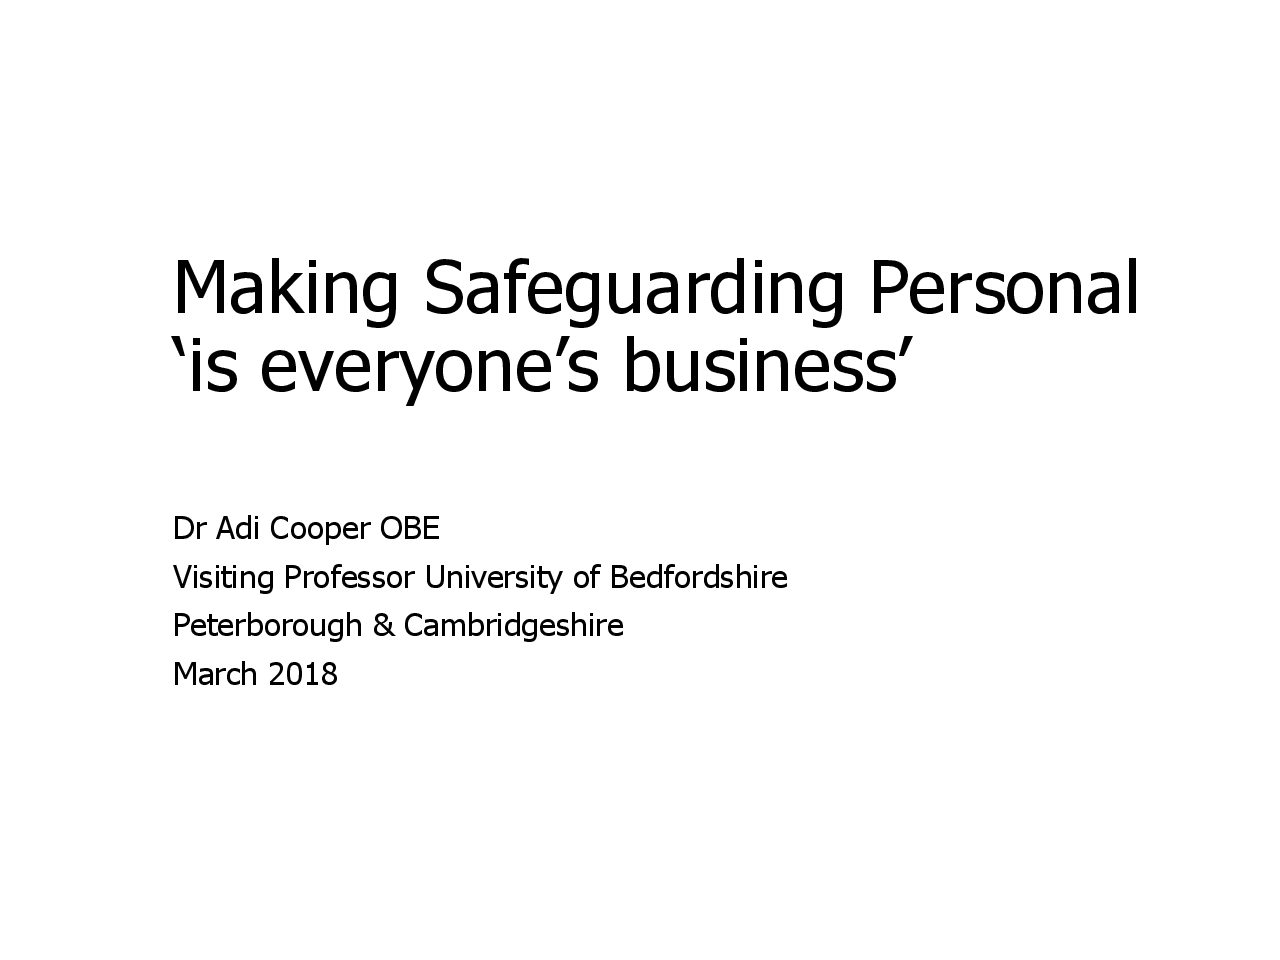 making safeguarding personal essay